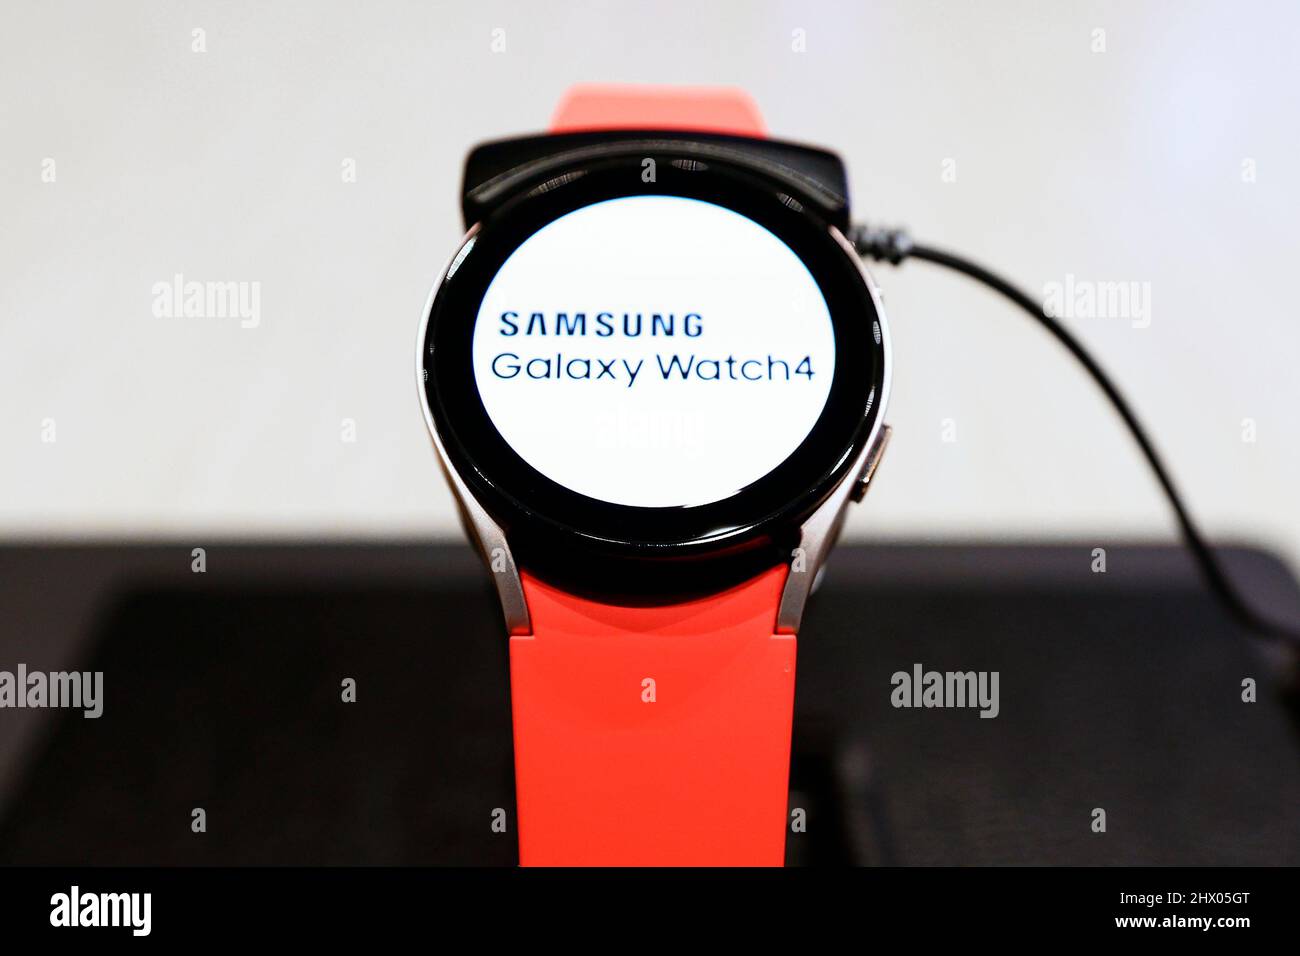 Barcelona, Spain. 28th Feb, 2022. (2/28/2022) A red Samsung Galaxy Watch4,  the latest wearable smartwatch presented by the South Korean brand, being  exhibited at Mobile World Congress (MWC) the biggest trade show